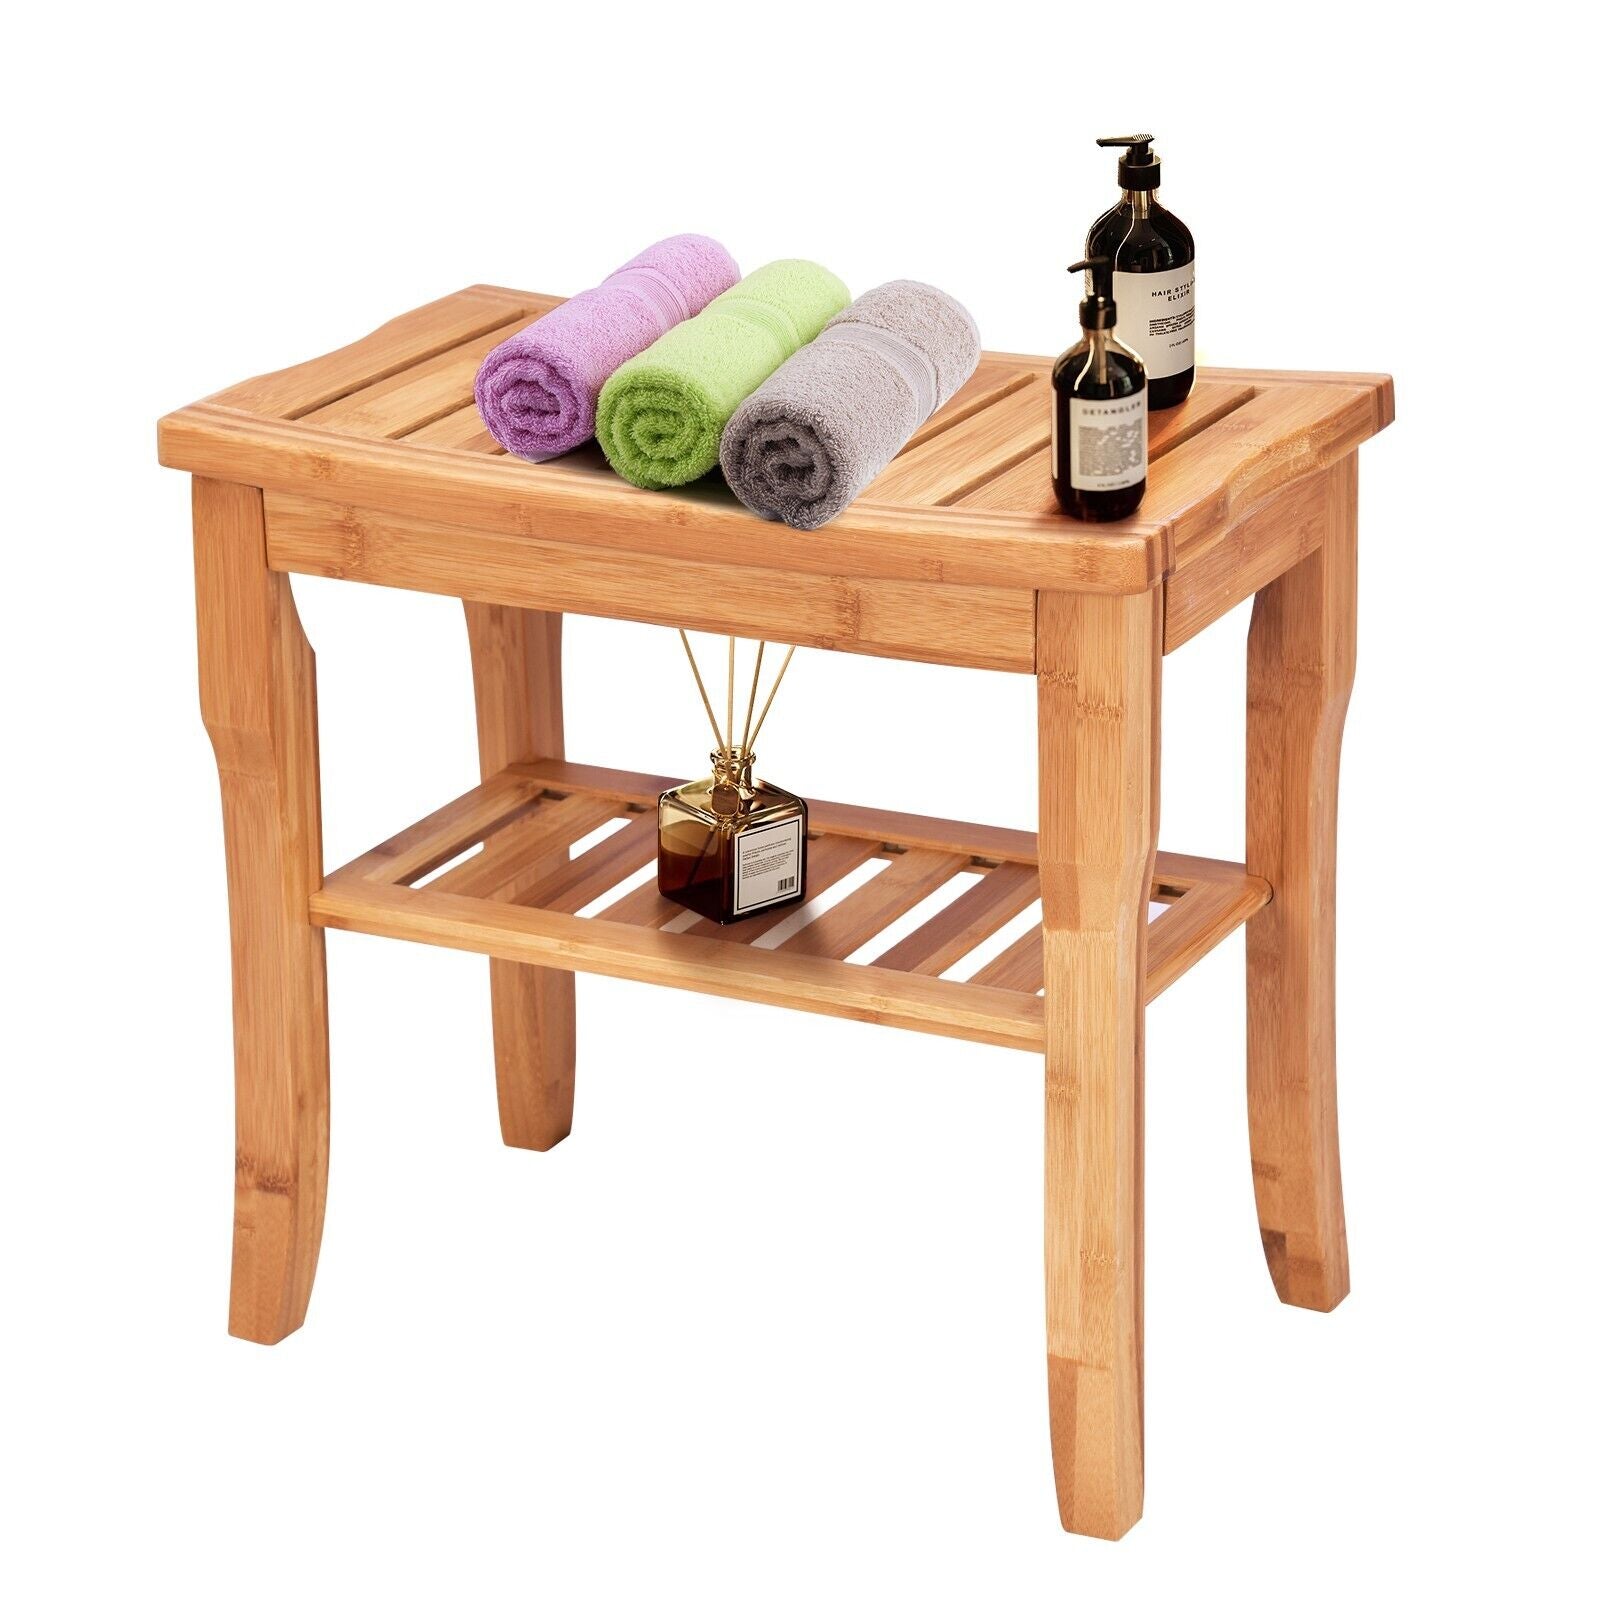 Bamboo Shower Bench with Storage Shelf and Non-Slip Feet